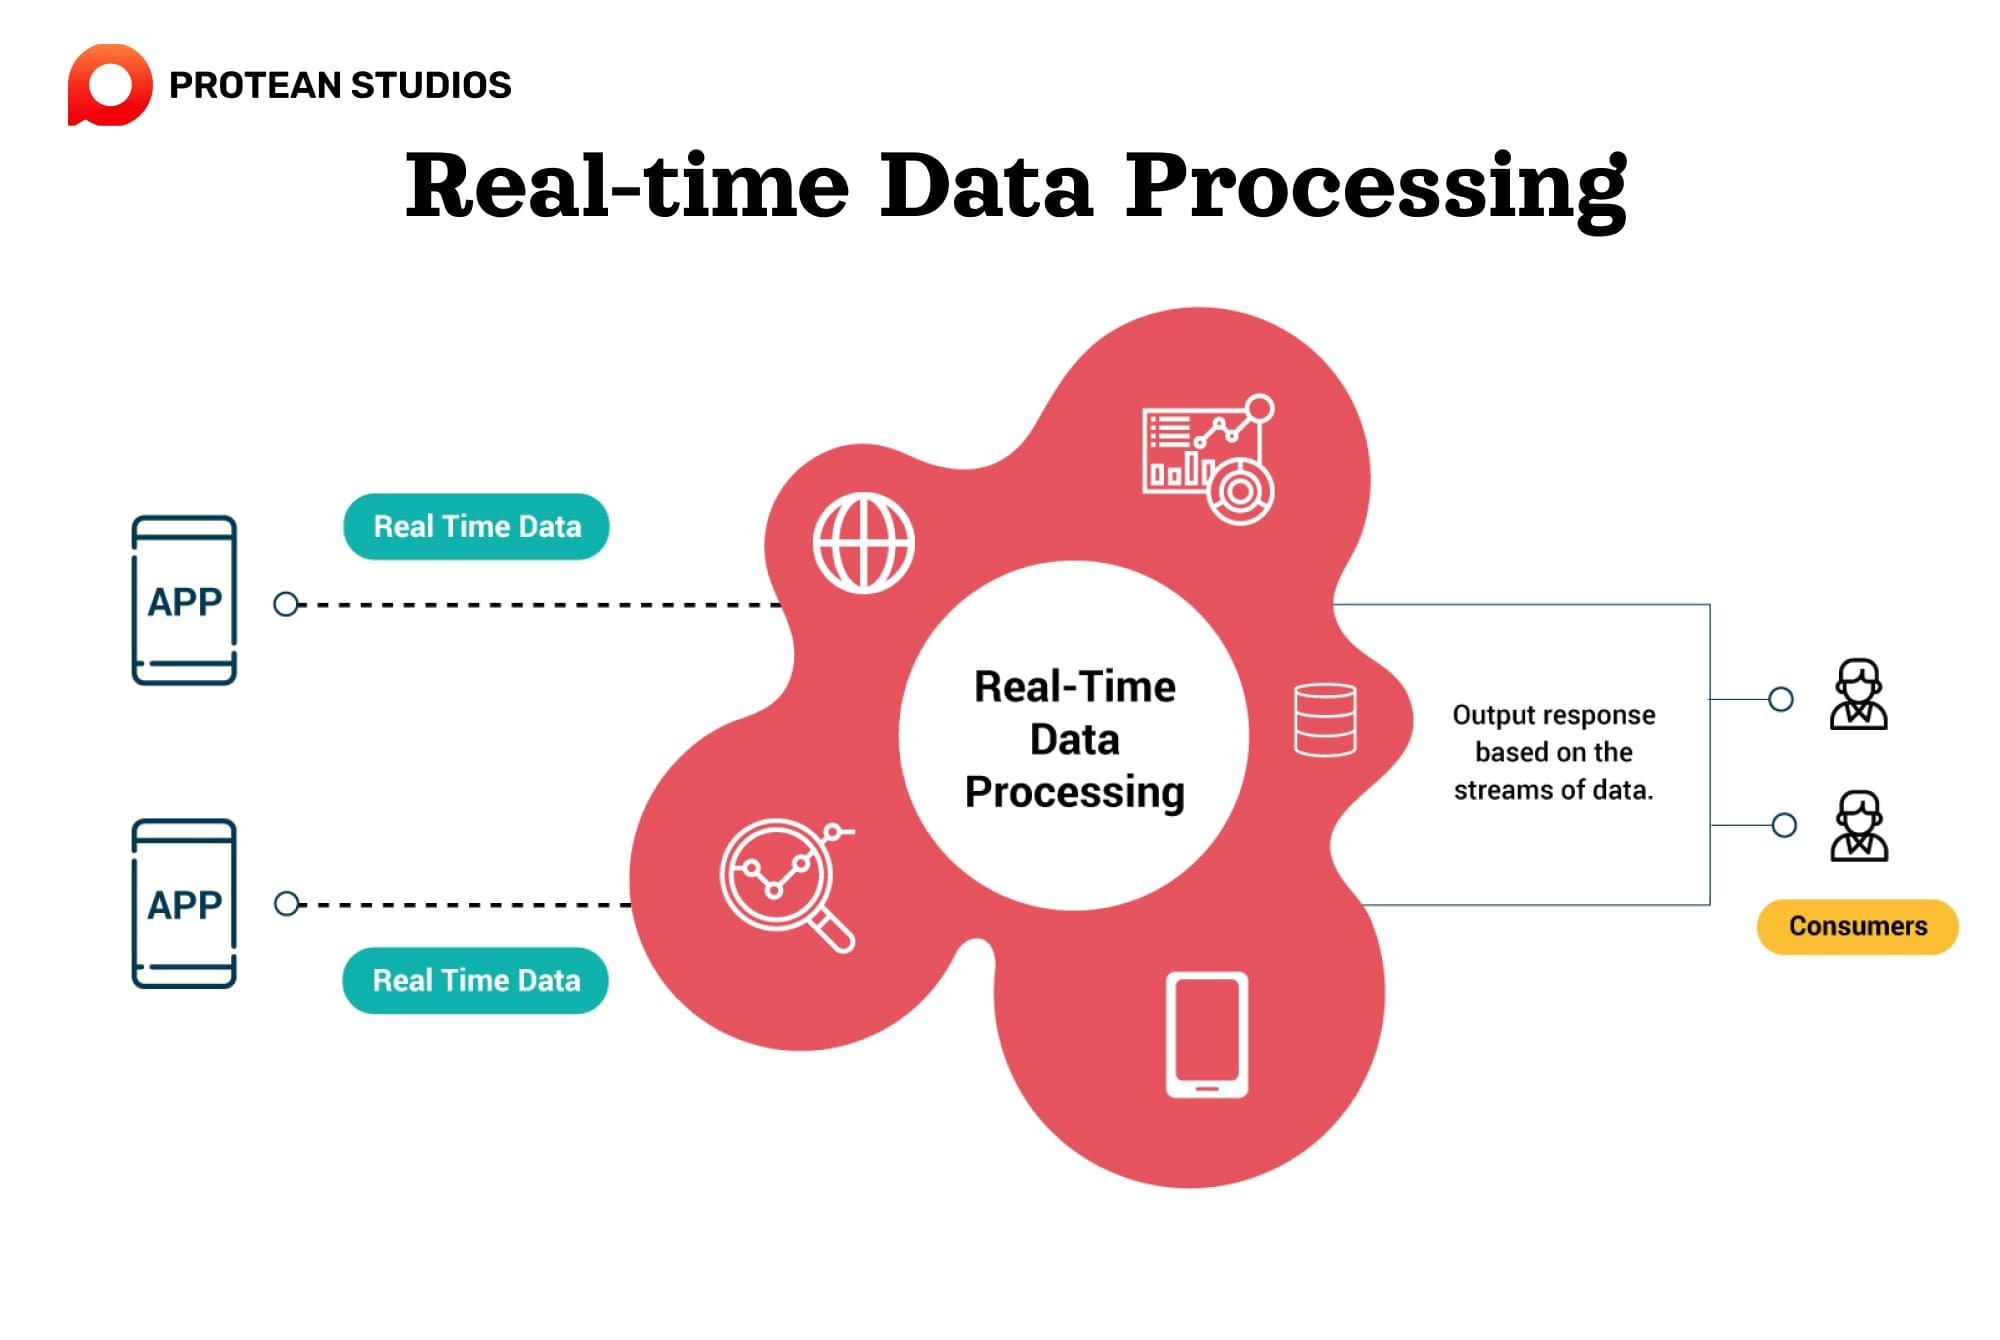 The overview of read-time data processing